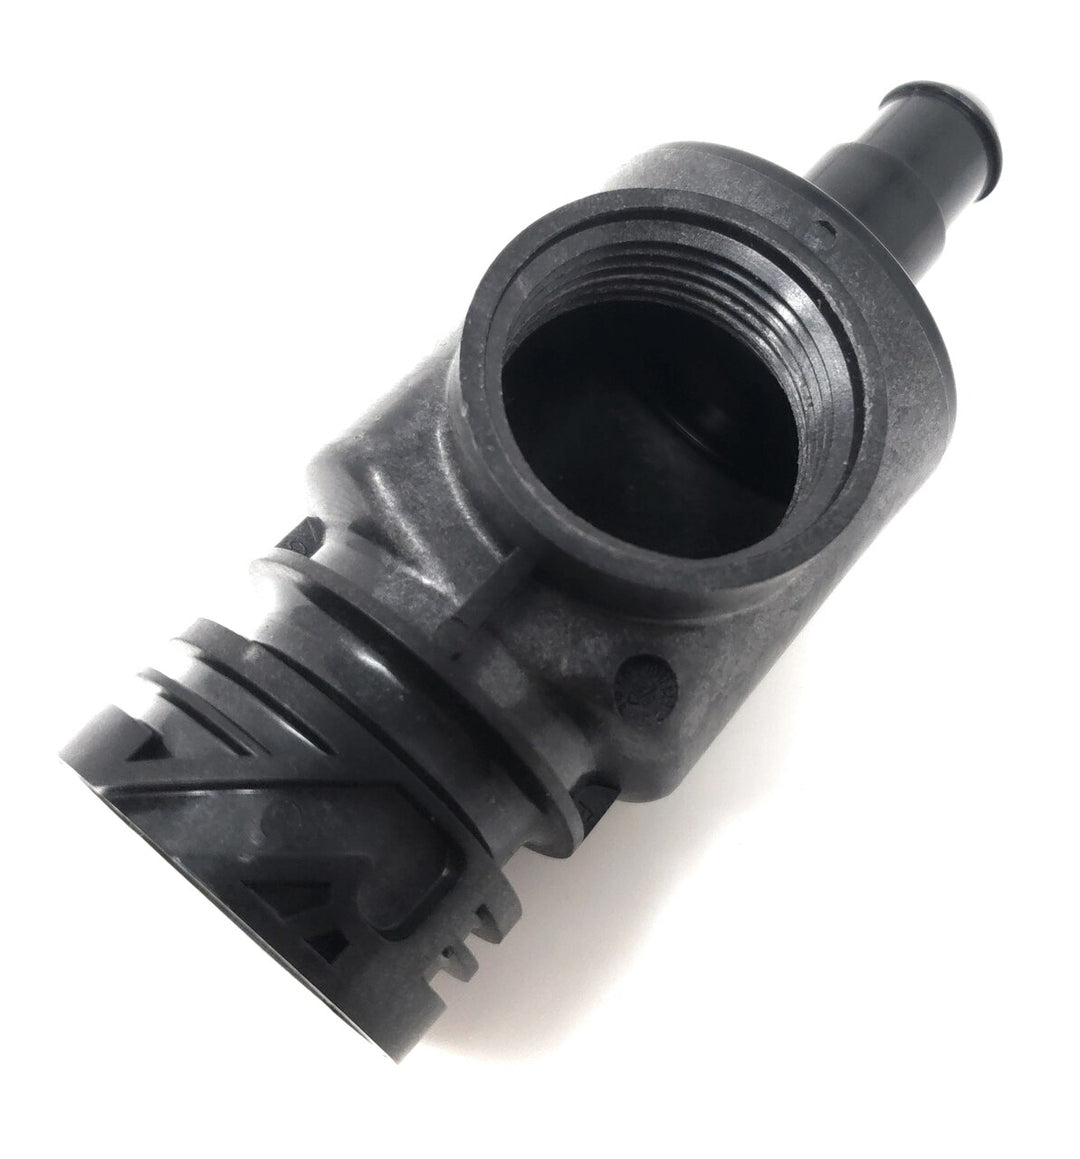 Top View of Quick Disconnect - Polaris 3900 Sport / "Trade Grade" TR35P and Quattro Sport Pressure Cleaner UWF Connector Assy, Blk - ePoolSupply